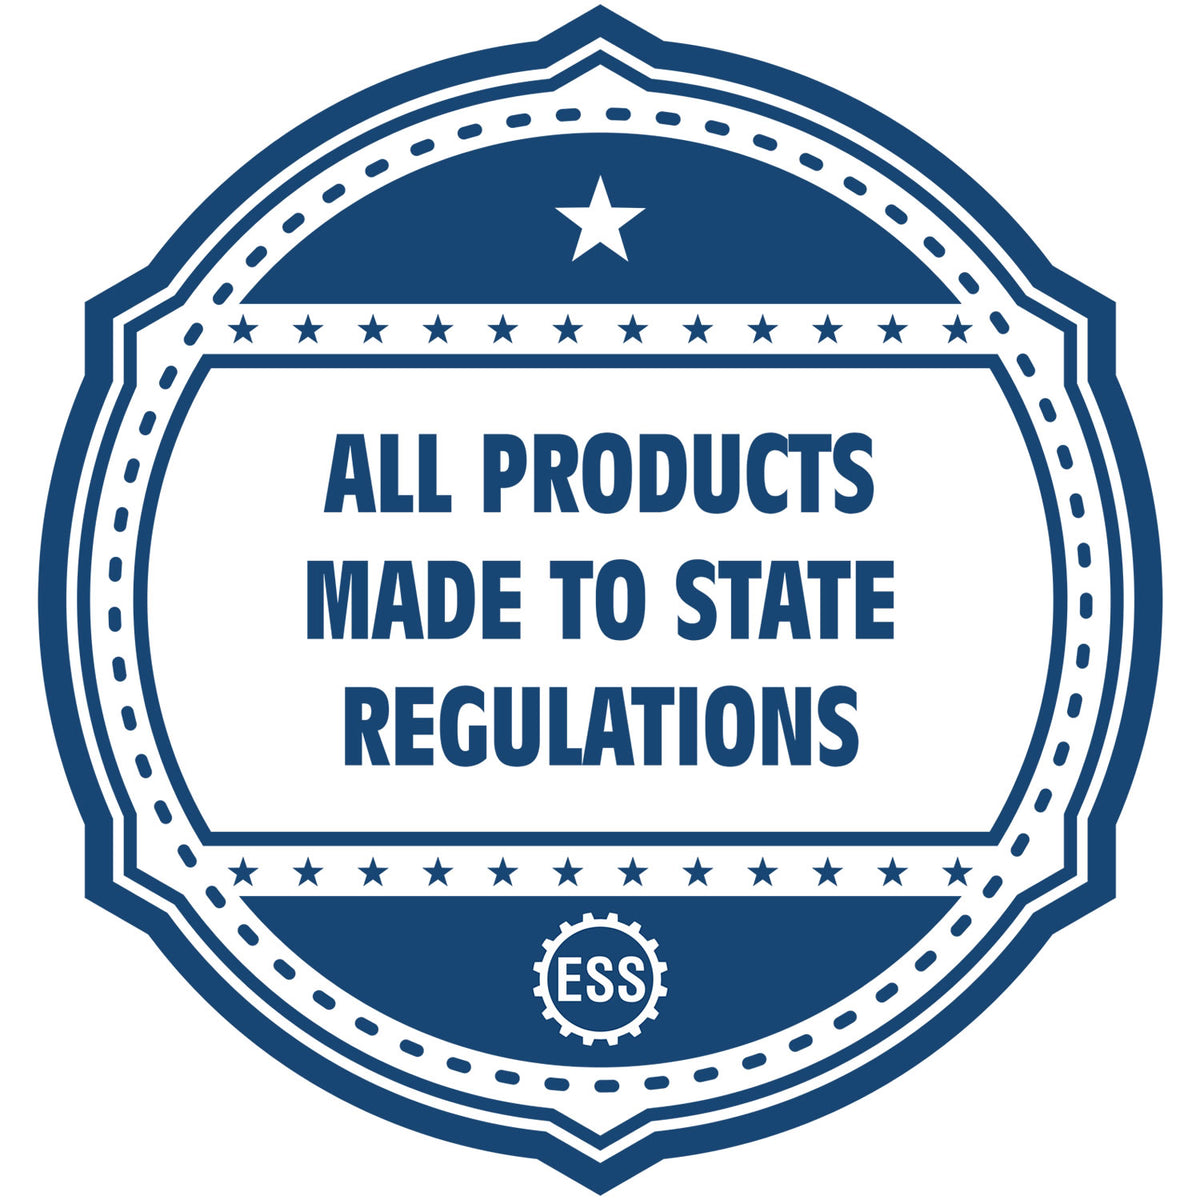 An icon or badge element for the Slim Pre-Inked Virginia Professional Engineer Seal Stamp showing that this product is made in compliance with state regulations.